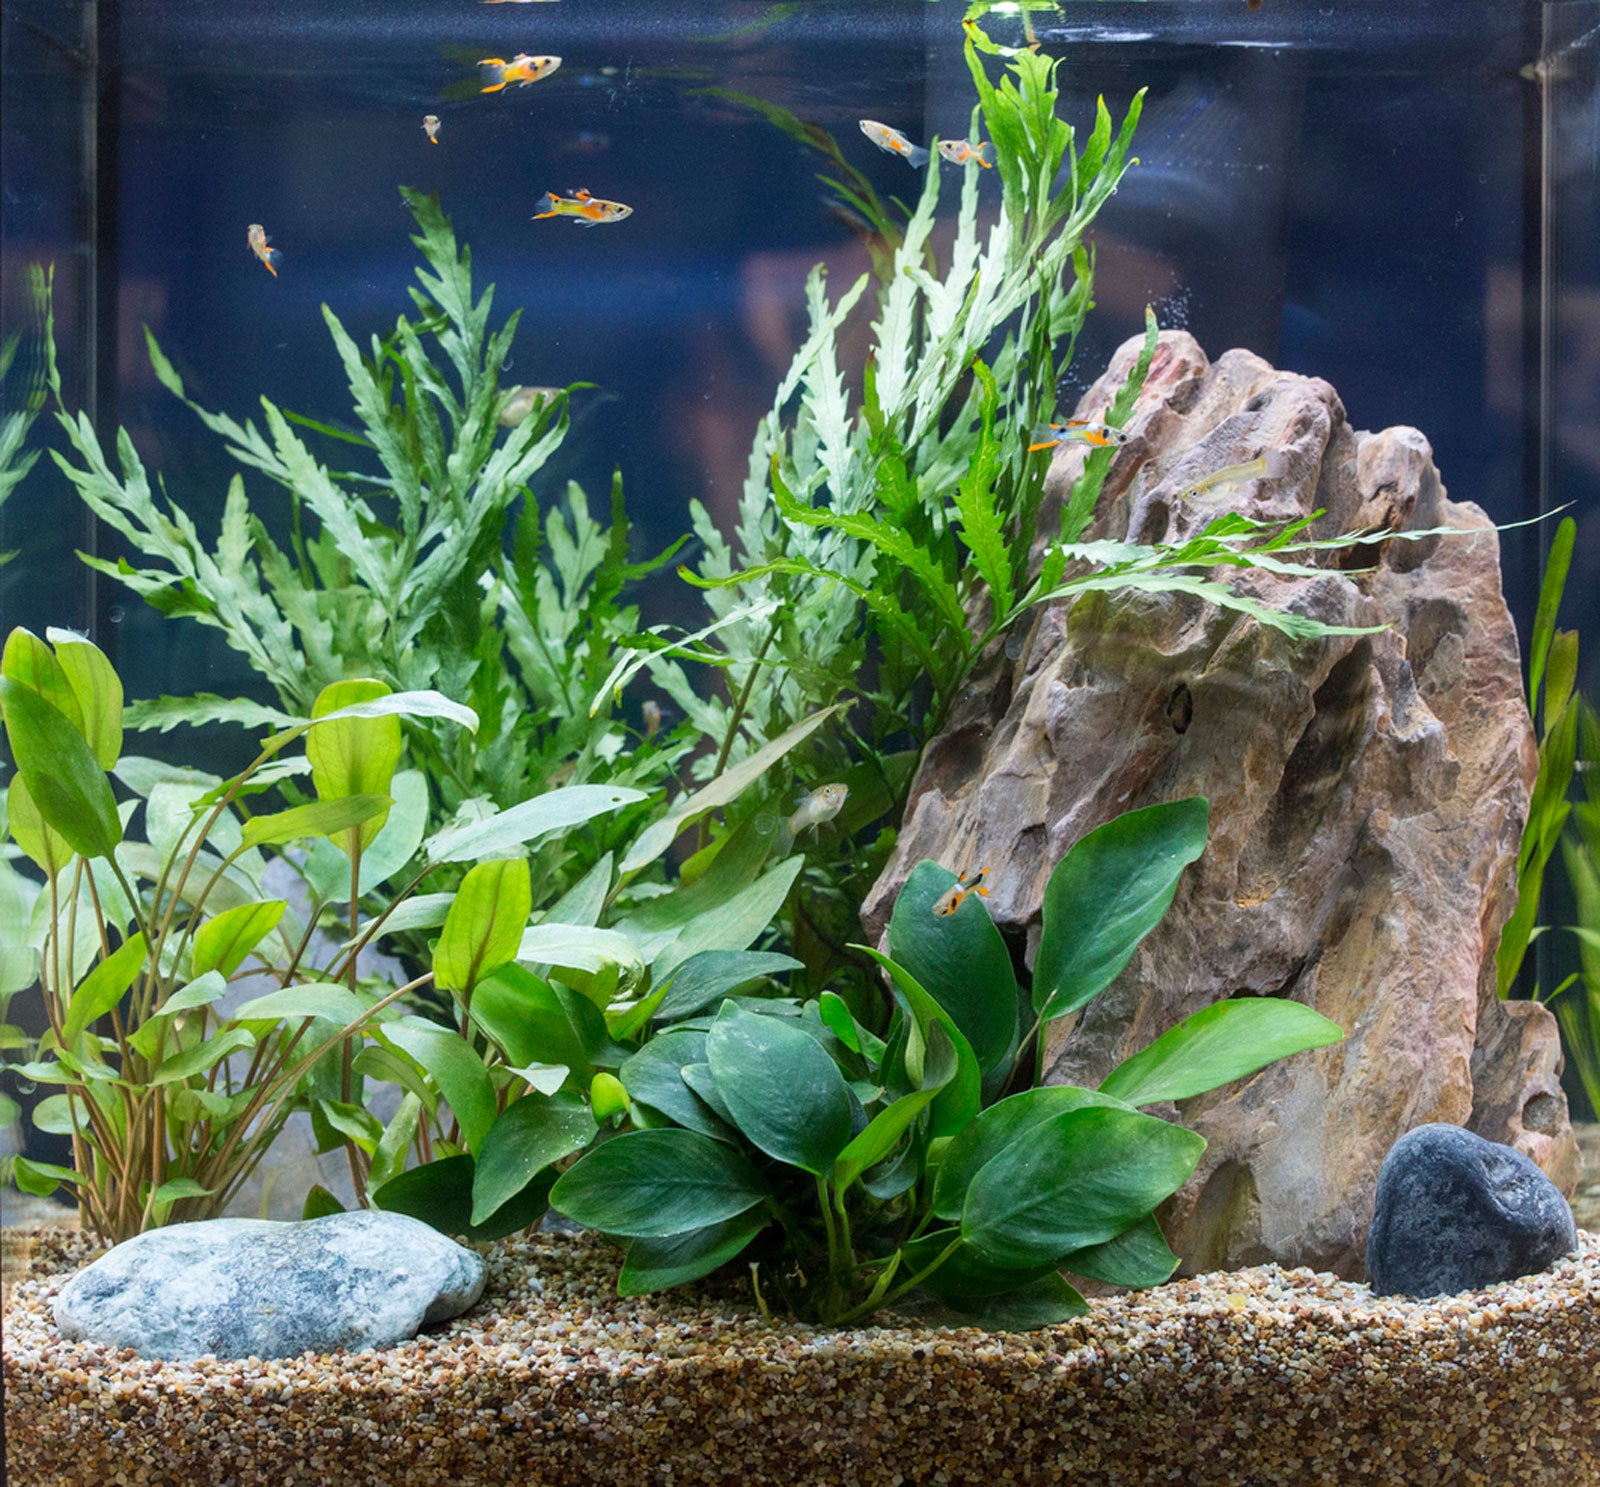 Pros and Cons of Using Live Plants in Your Home Aquarium - PetHelpful